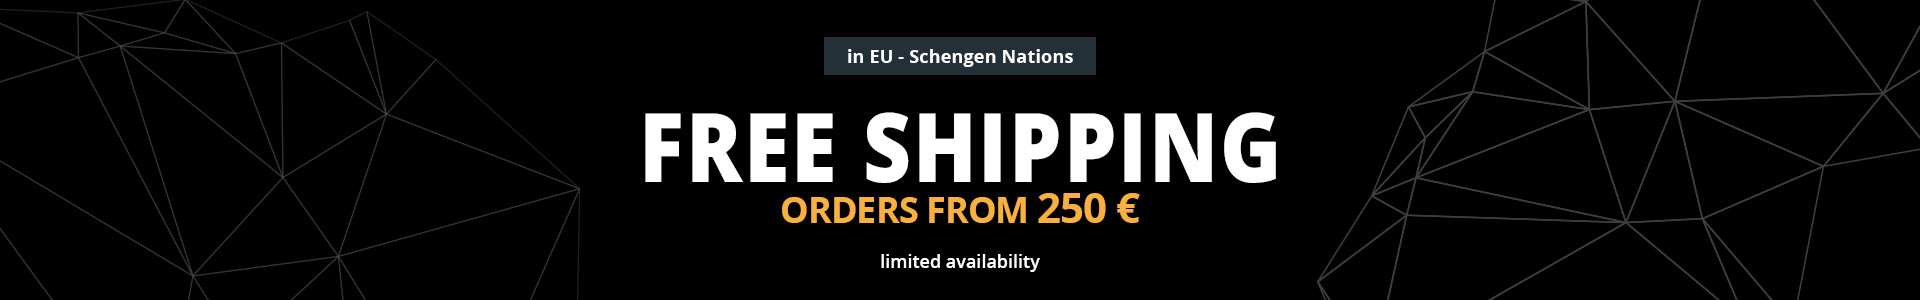 free shipping in eu from order 250 euro